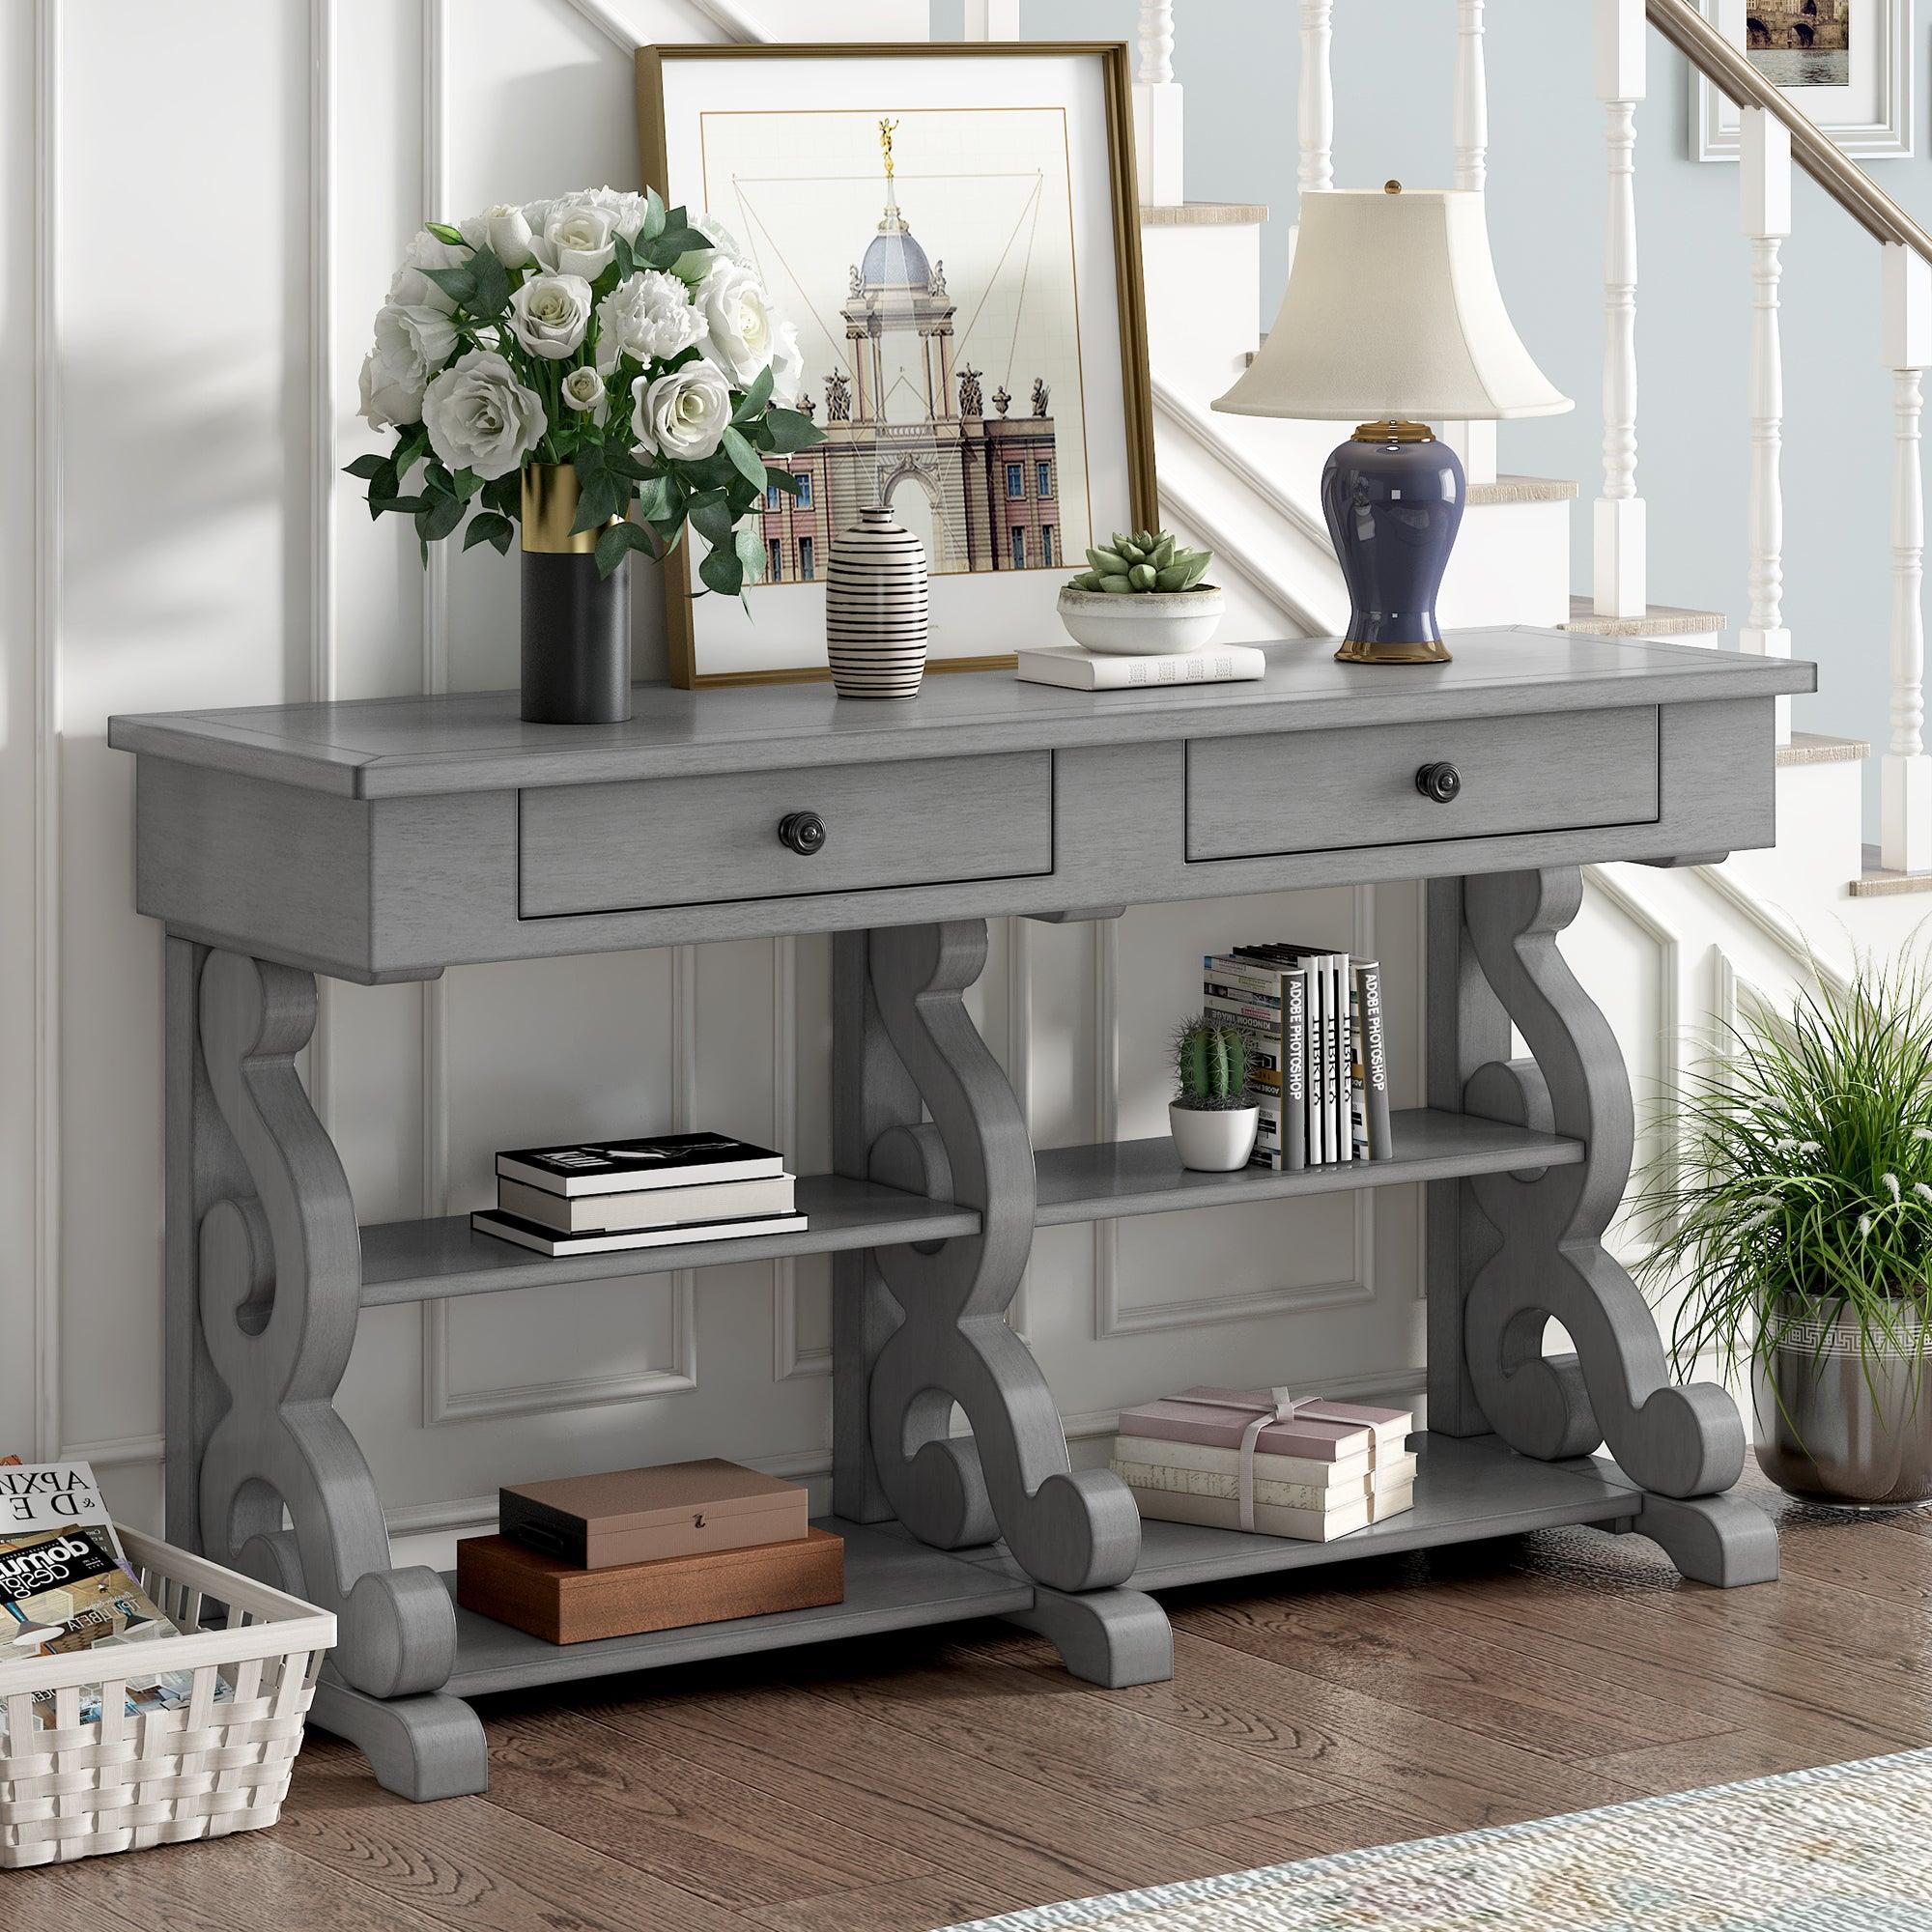 🆓🚛 Retro Console Table/Sideboard With Ample Storage, Open Shelves & Drawers for Entrance, Dinning Room, Living Room (Antique Gray)